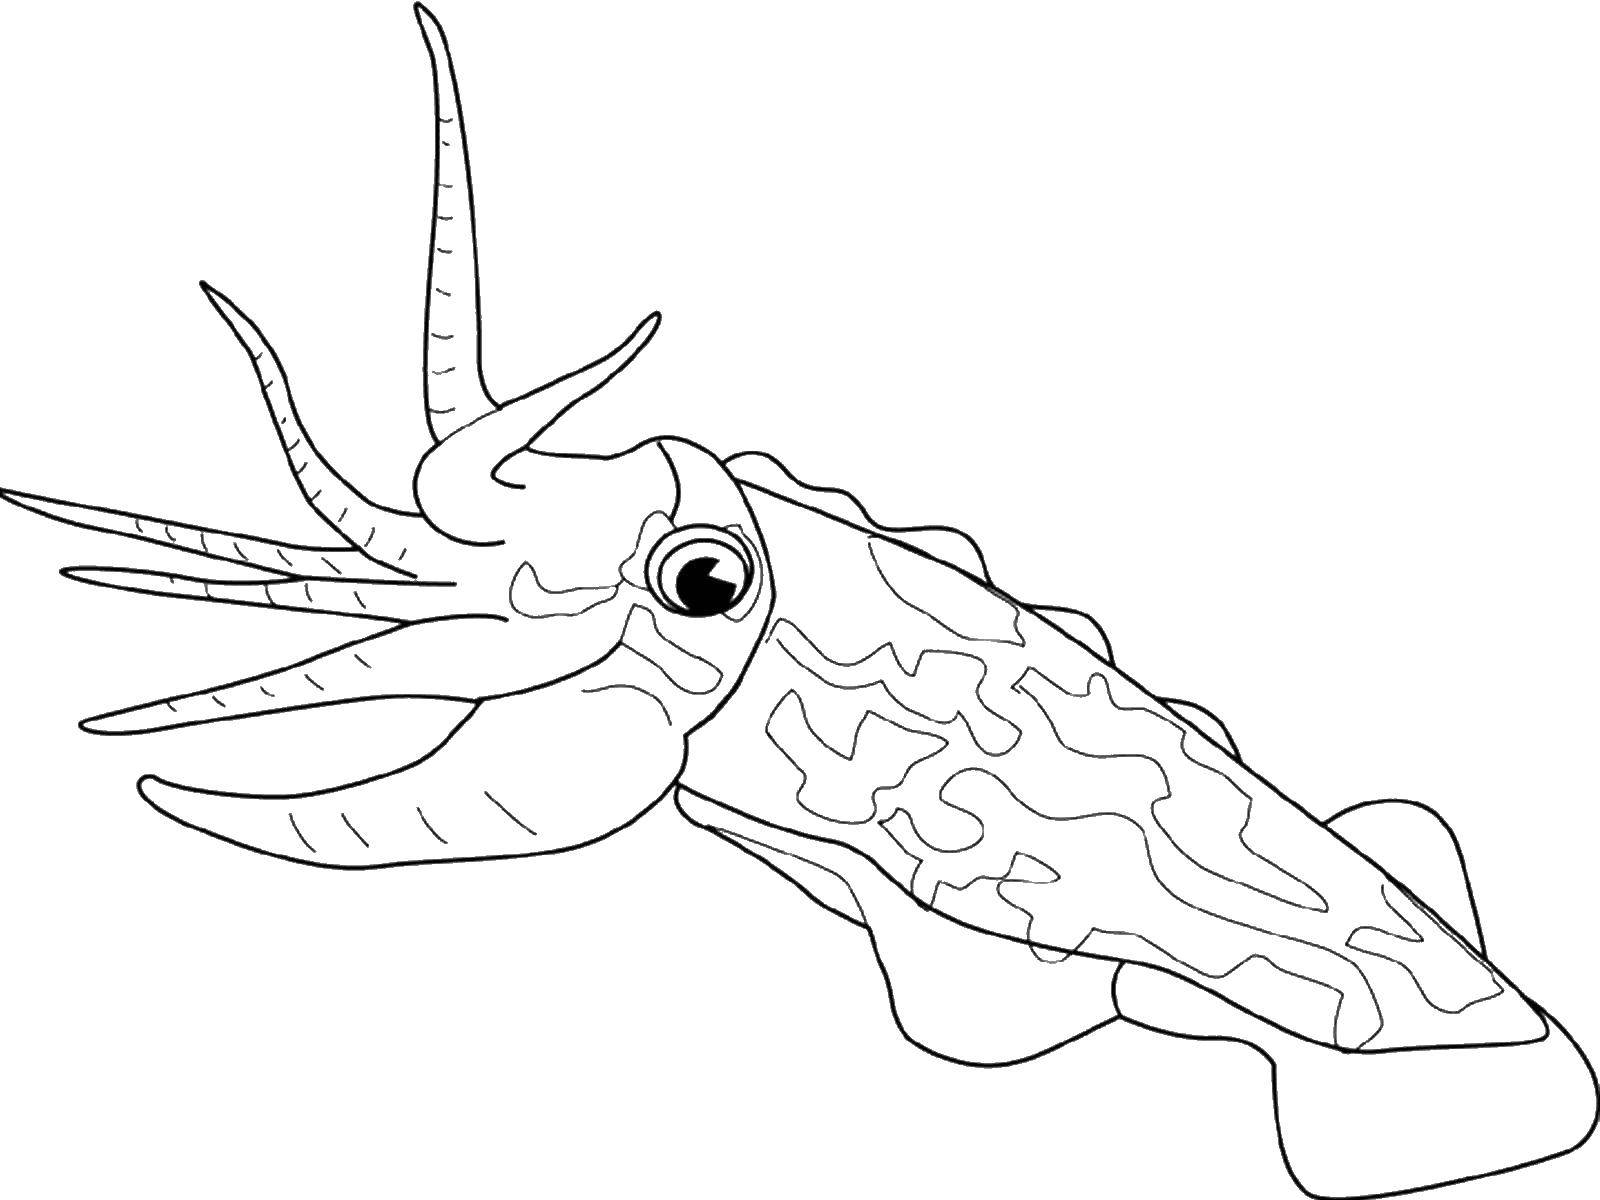 Coloring Octopus. Category marine. Tags:  octopus.